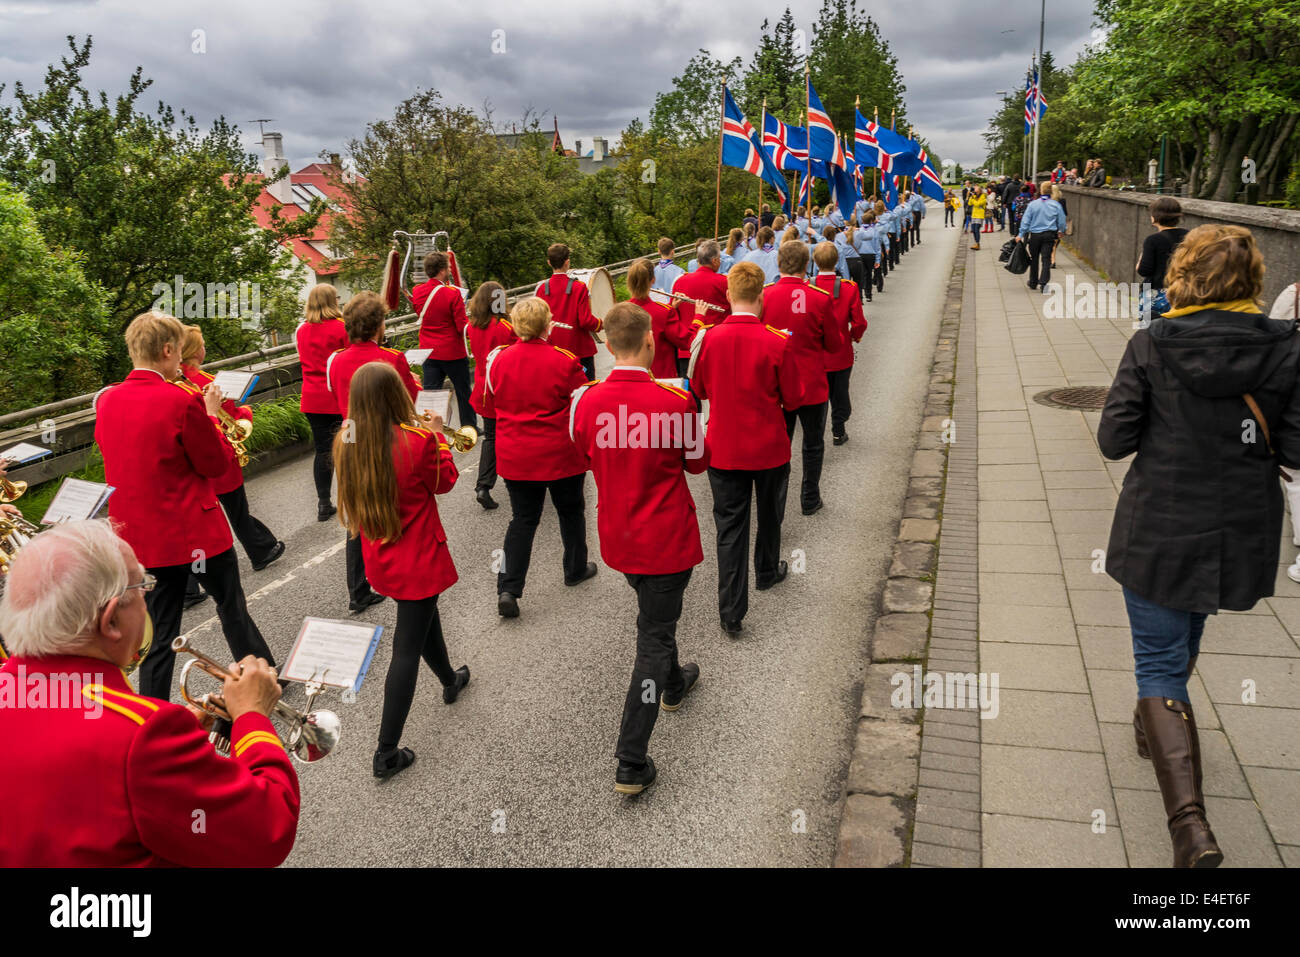 Marching band and Scouts parade during June 17th, Iceland's Independence Day, Reykjavik, Iceland Stock Photo